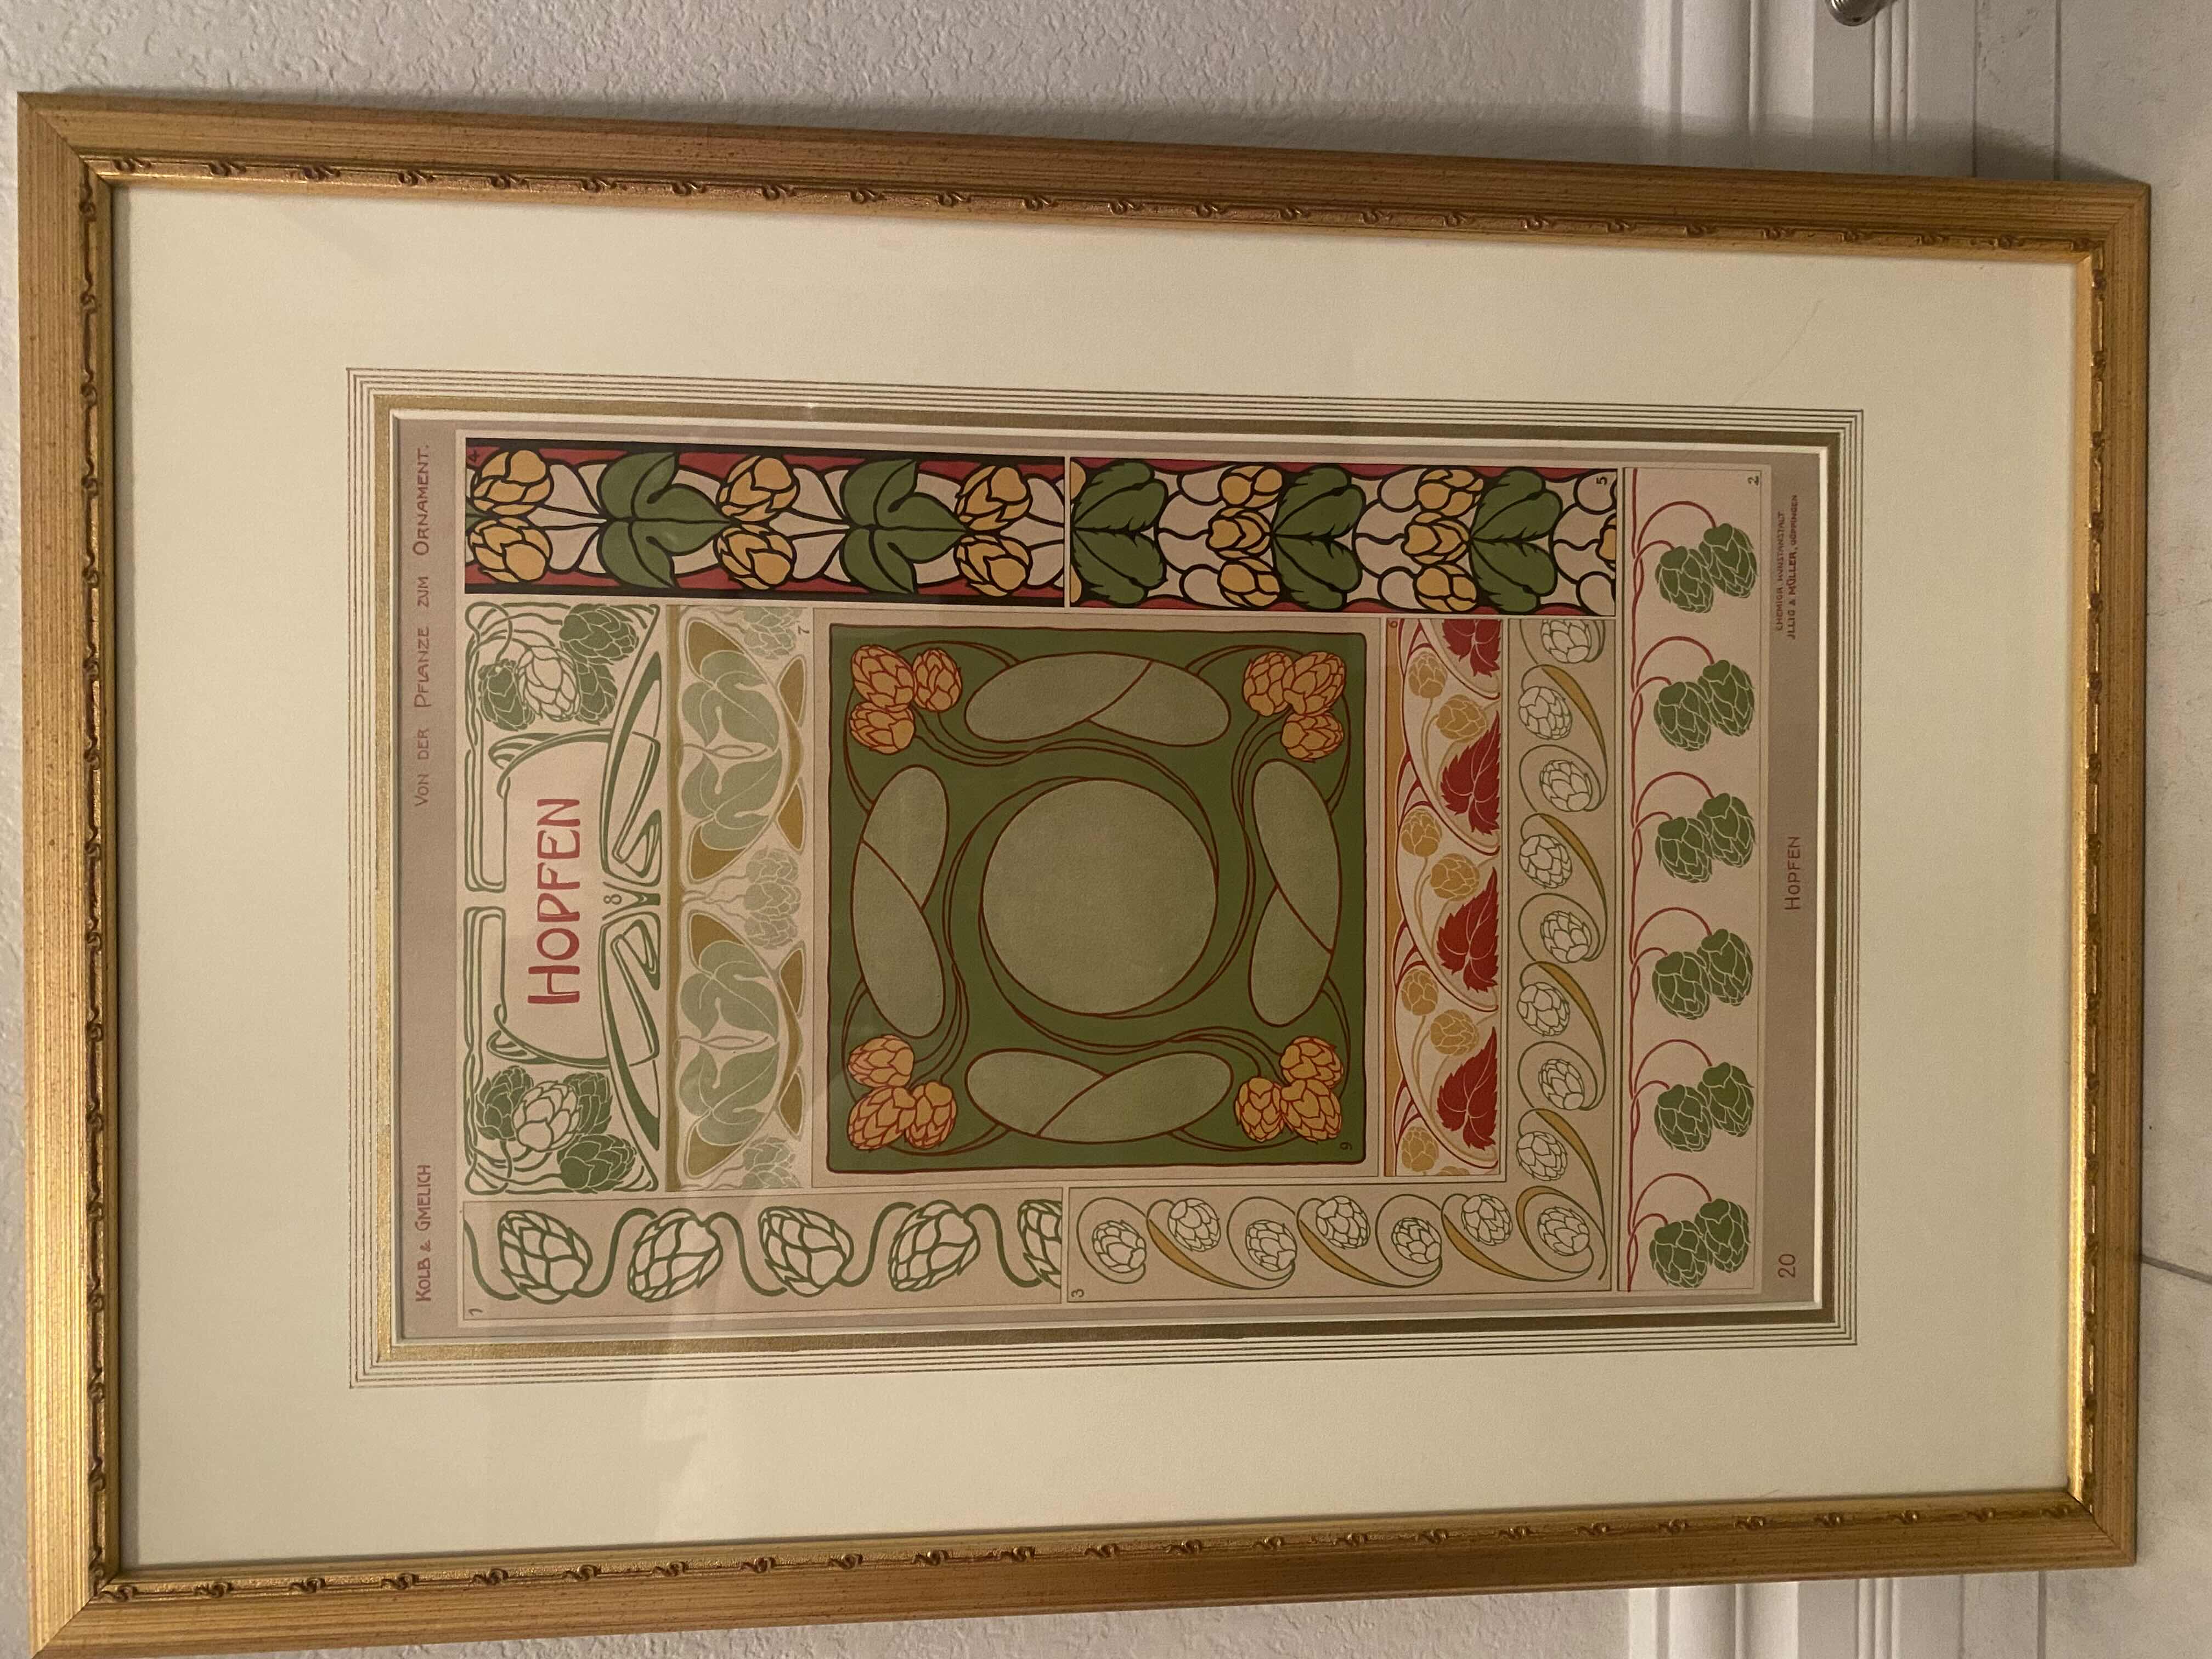 Photo 1 of GOLD WOOD CUSTOM FRAMED & MATTED CHROMOLITHOGRAPH, 1902 FROM PLANTS IN ORNAMENT GERMAN DESIGN BOOK HOPFEN ARTWORK  20” X 29 1/2”